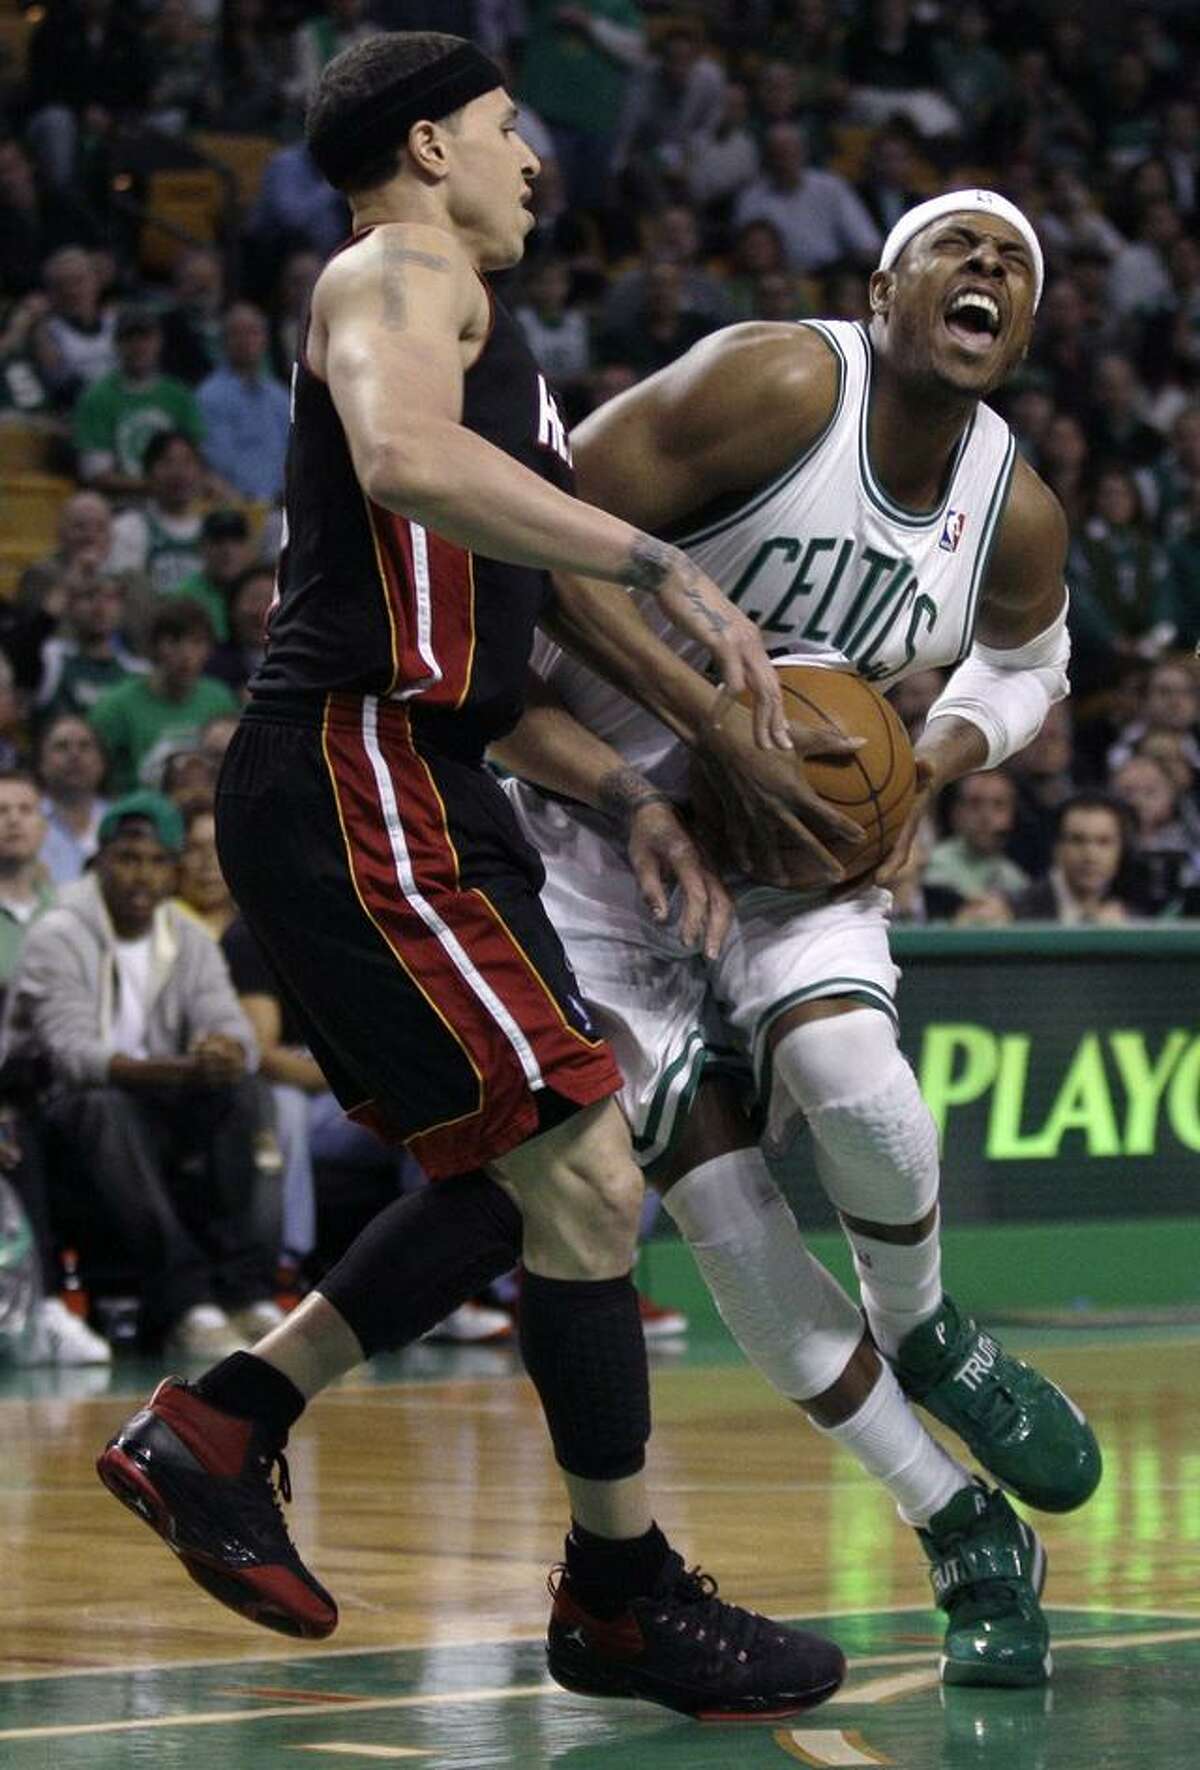 Boston Celtics forward Paul Pierce yells as he tries to get past Miami Heat guard Mike Bibby on a drive to the basket during the first quarter of Game 4 of a second-round NBA playoff basketball series, in Boston on Monday, May 9, 2011. (AP Photo/Charles Krupa)